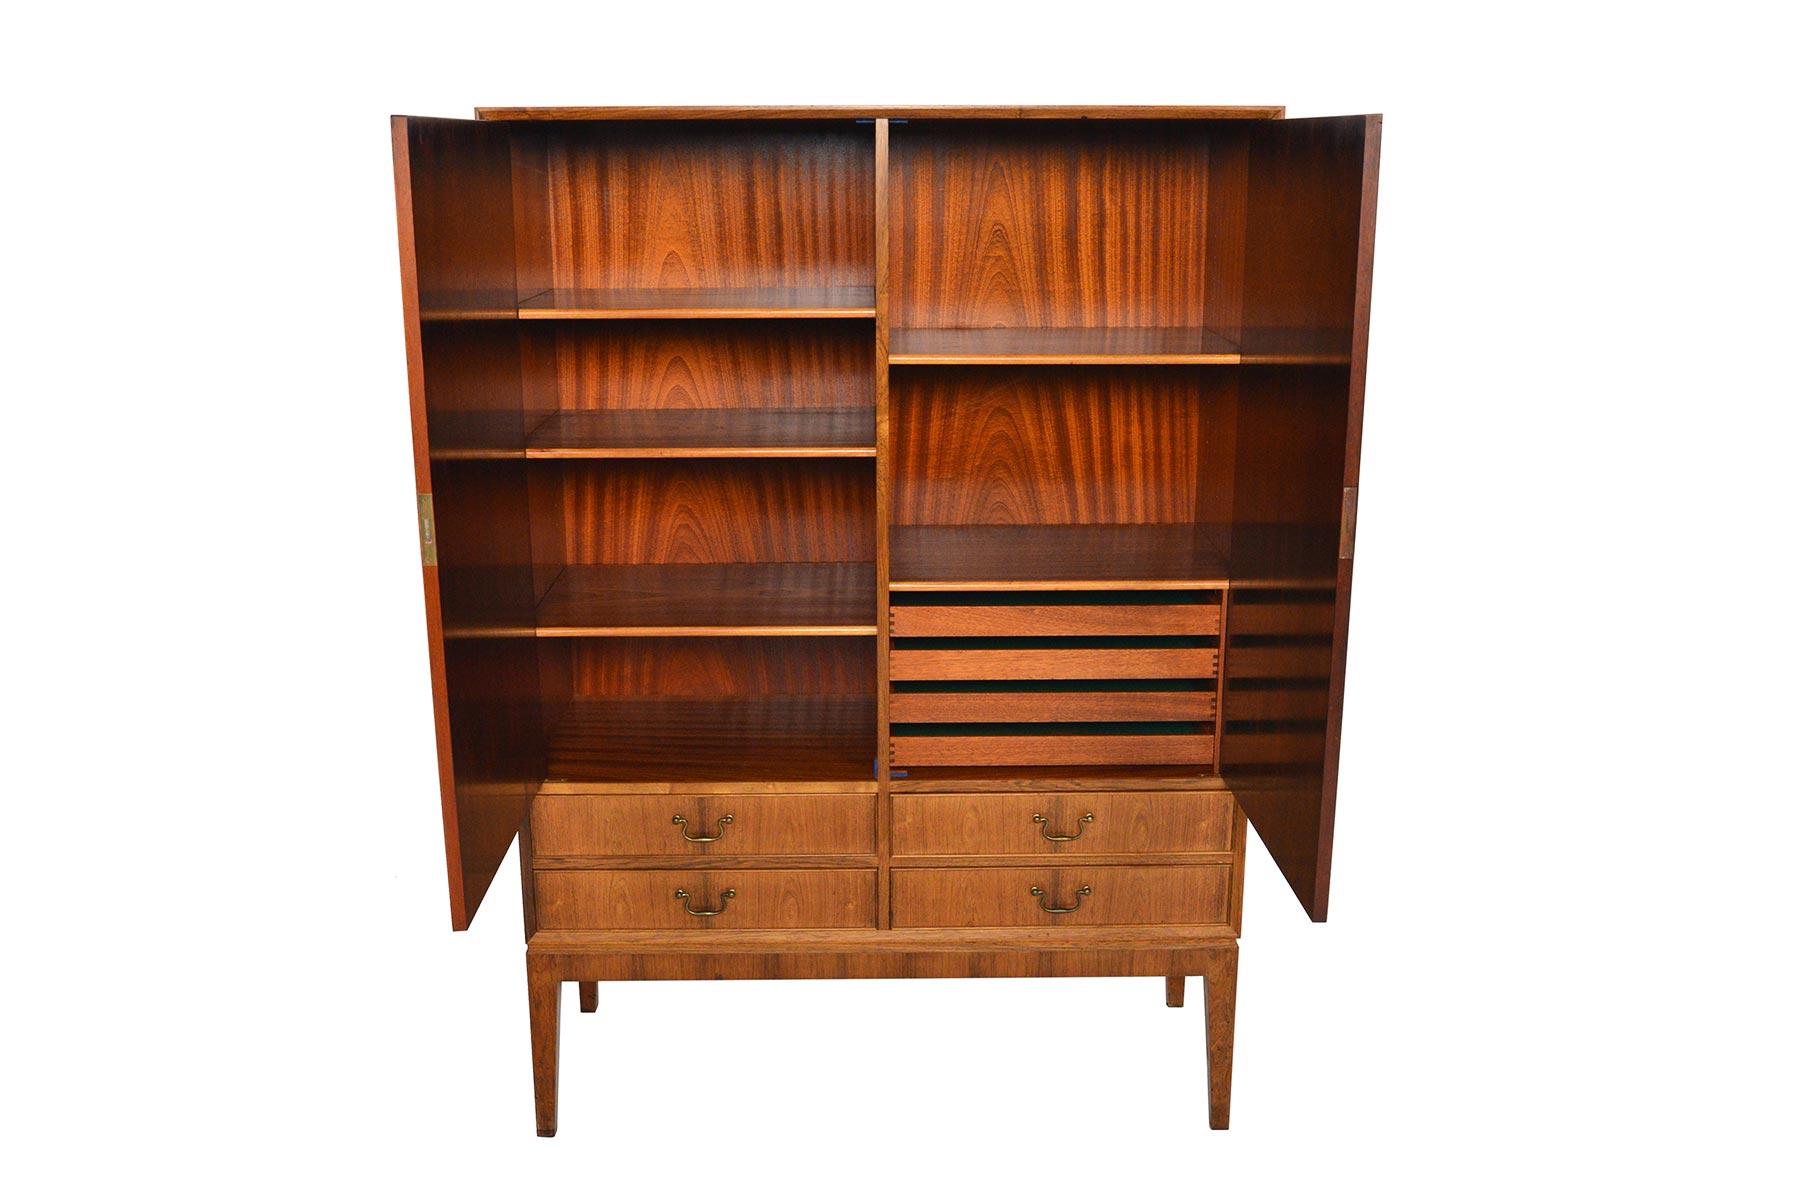 This tall Danish modern bureau is crafted in Brazilian rosewood and offers a beautiful sun- patinated finish. Two large locking doors open to two bays with adjustable shelves and drawers. Four lower drawers with brass pulls provide additional